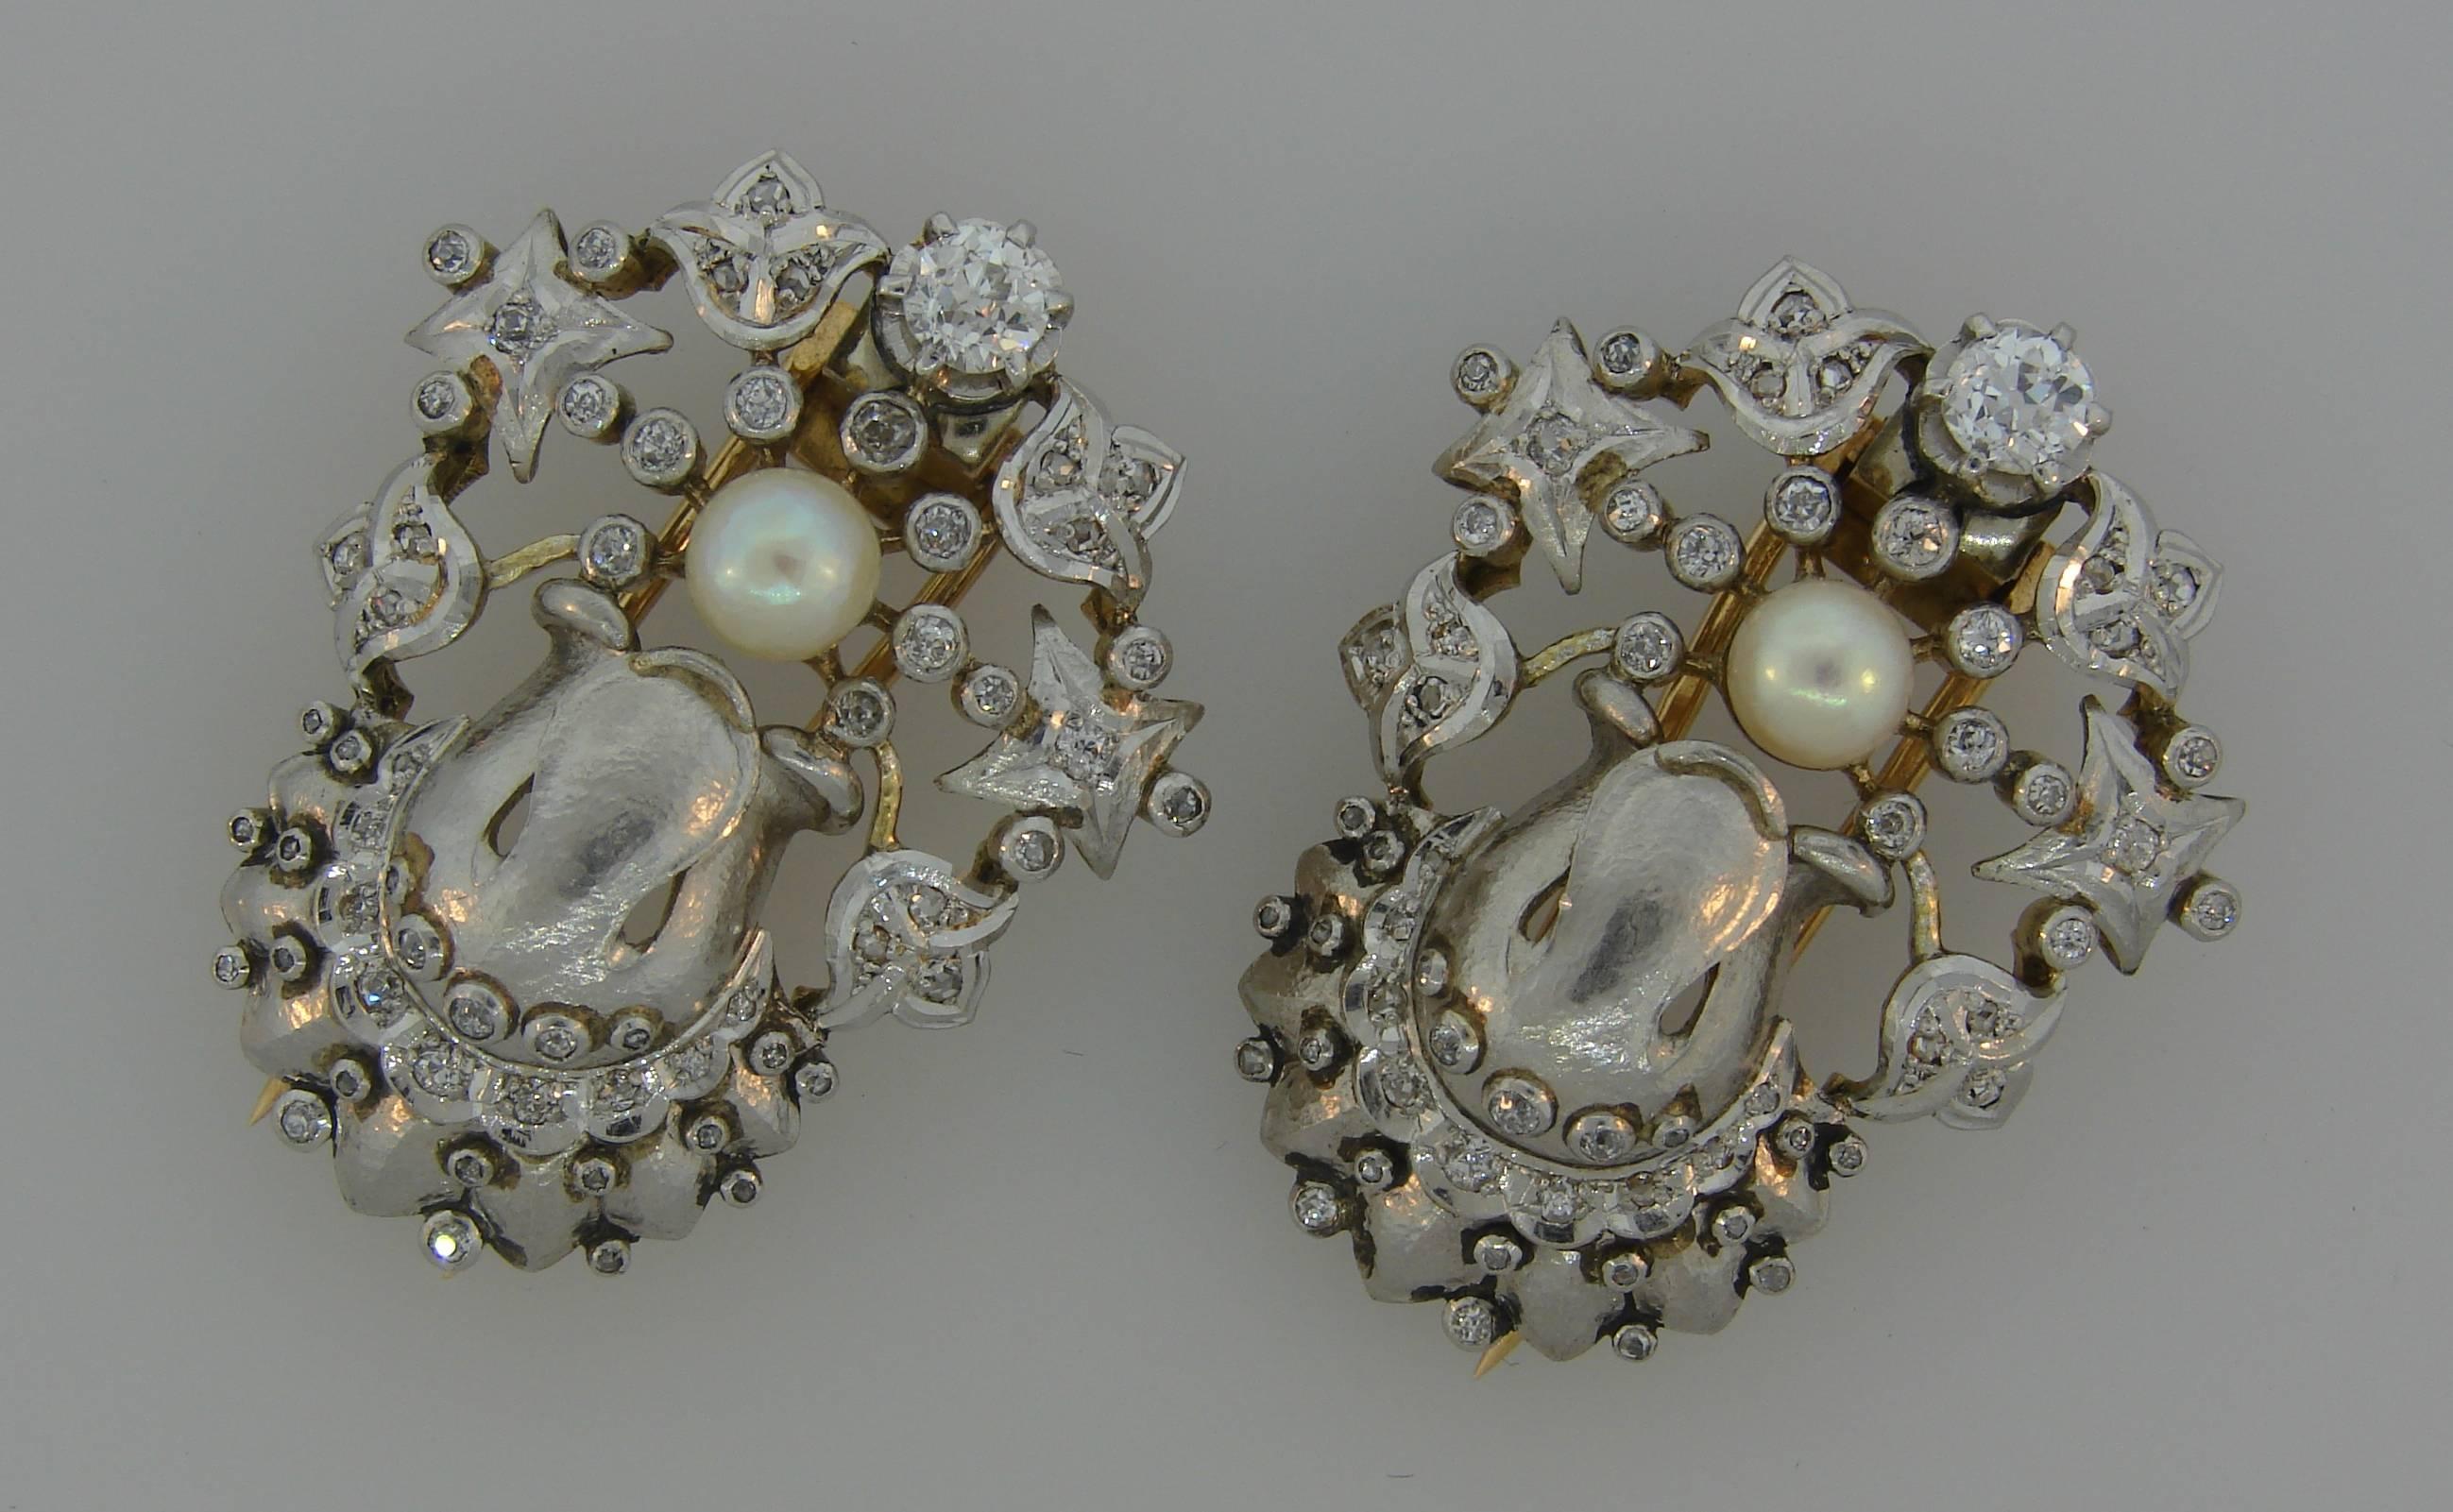 A pair of double clips created in France in the 1930s. Unusual and French chic, the pair is a great addition to your jewelry collection.
Made of platinum (tested) and 18 karat (tested) yellow gold and set with a pearl and Old European cut diamonds.